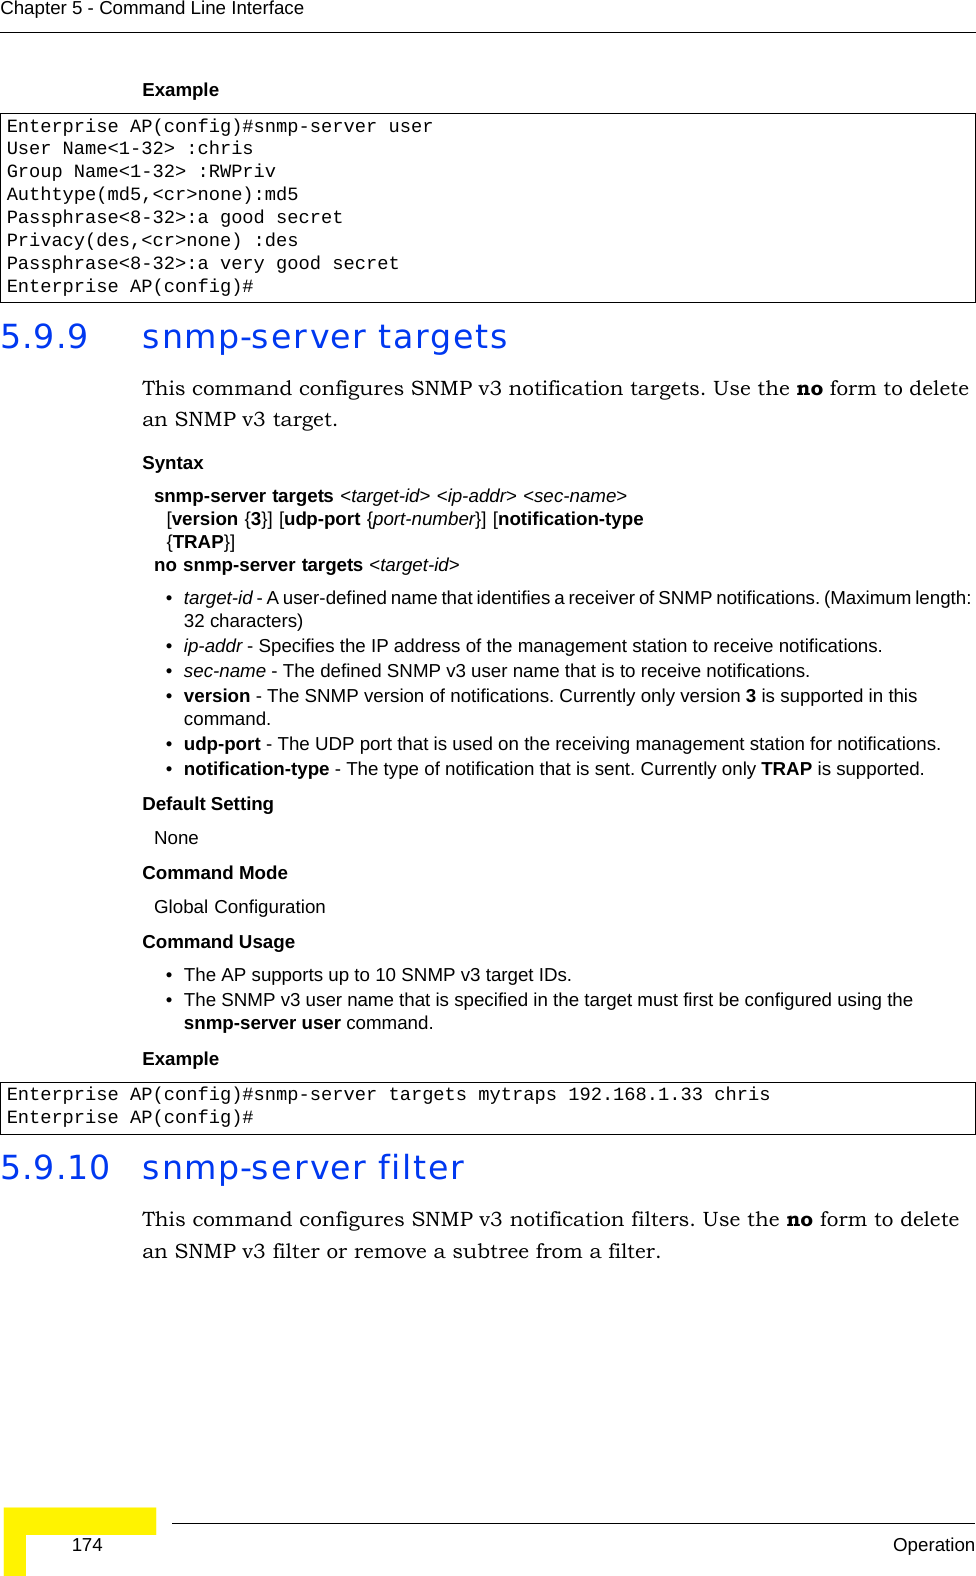  174 OperationChapter 5 - Command Line InterfaceExample 5.9.9 snmp-server targetsThis command configures SNMP v3 notification targets. Use the no form to delete an SNMP v3 target.Syntaxsnmp-server targets &lt;target-id&gt; &lt;ip-addr&gt; &lt;sec-name&gt;   [version {3}] [udp-port {port-number}] [notification-type   {TRAP}]no snmp-server targets &lt;target-id&gt;•target-id - A user-defined name that identifies a receiver of SNMP notifications. (Maximum length: 32 characters)•ip-addr - Specifies the IP address of the management station to receive notifications.•sec-name - The defined SNMP v3 user name that is to receive notifications.•version - The SNMP version of notifications. Currently only version 3 is supported in this command.•udp-port - The UDP port that is used on the receiving management station for notifications.•notification-type - The type of notification that is sent. Currently only TRAP is supported.Default Setting NoneCommand Mode Global ConfigurationCommand Usage • The AP supports up to 10 SNMP v3 target IDs.• The SNMP v3 user name that is specified in the target must first be configured using the snmp-server user command.Example 5.9.10 snmp-server filterThis command configures SNMP v3 notification filters. Use the no form to delete an SNMP v3 filter or remove a subtree from a filter.Enterprise AP(config)#snmp-server user User Name&lt;1-32&gt; :chrisGroup Name&lt;1-32&gt; :RWPrivAuthtype(md5,&lt;cr&gt;none):md5Passphrase&lt;8-32&gt;:a good secretPrivacy(des,&lt;cr&gt;none) :desPassphrase&lt;8-32&gt;:a very good secretEnterprise AP(config)#Enterprise AP(config)#snmp-server targets mytraps 192.168.1.33 chrisEnterprise AP(config)#